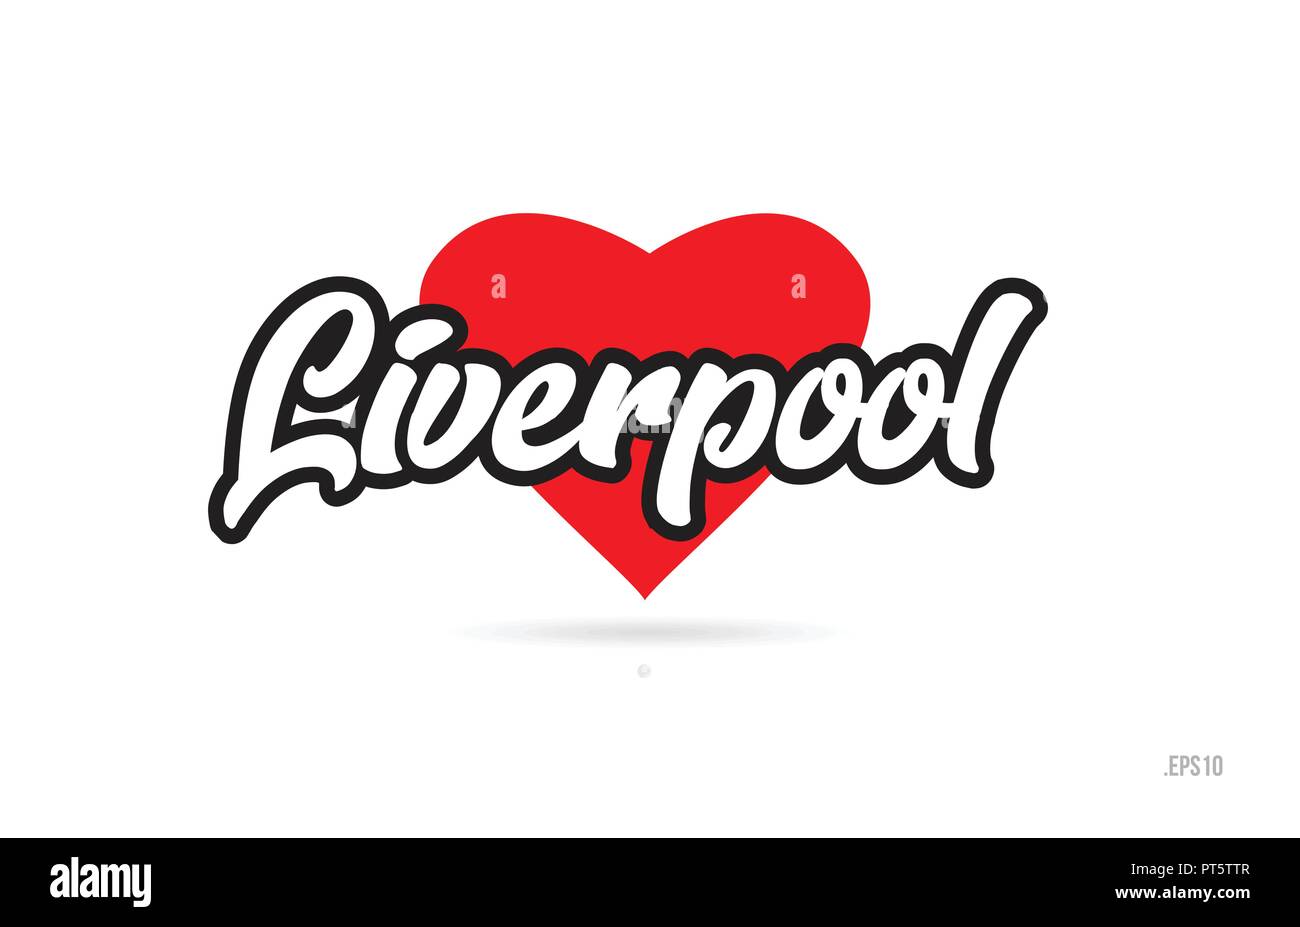 liverpool city text design with red heart typographic icon design suitable for touristic promotion Stock Vector